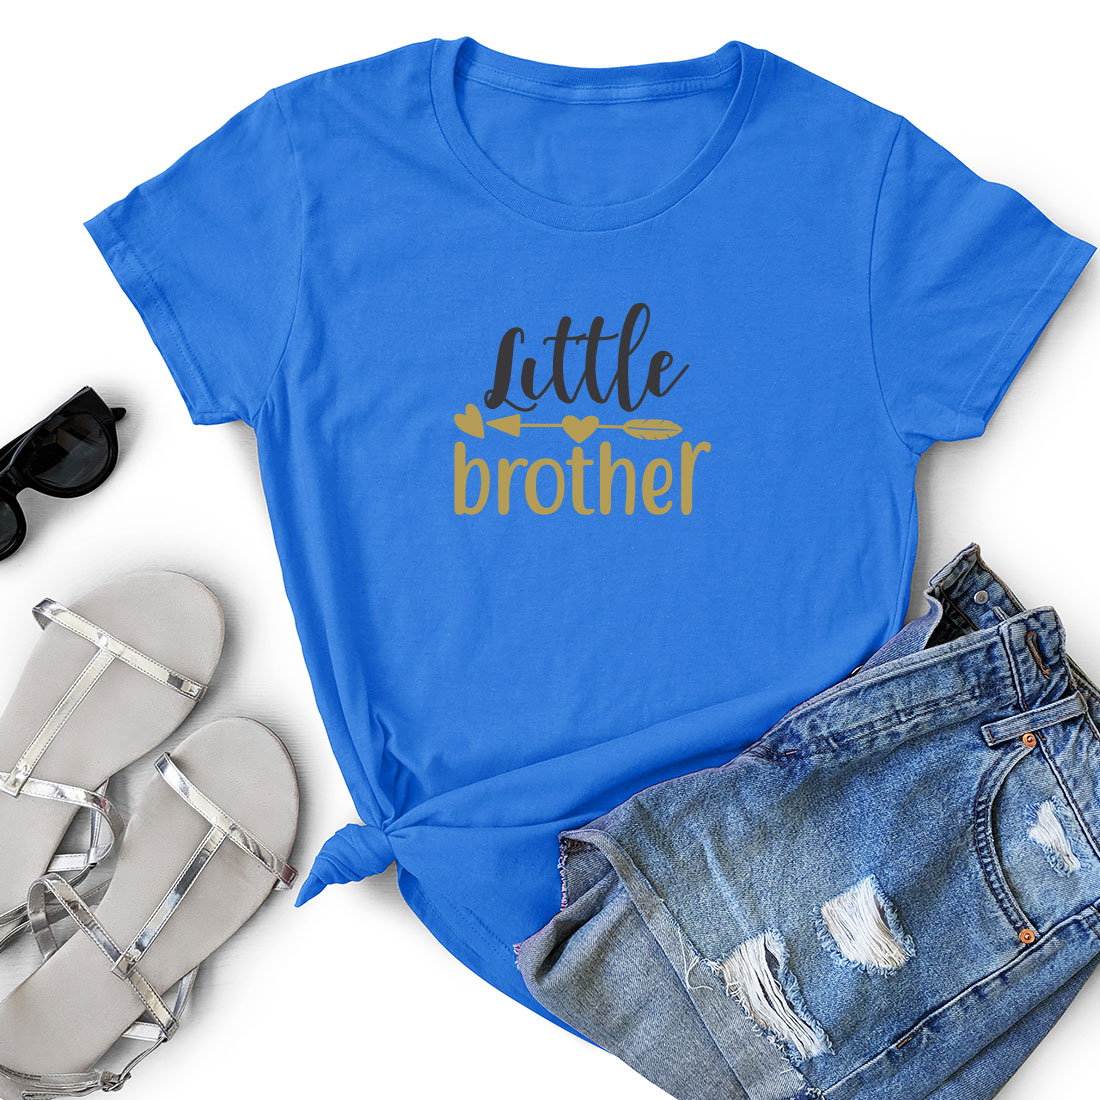 T - shirt that says little brother next to a pair of shorts.